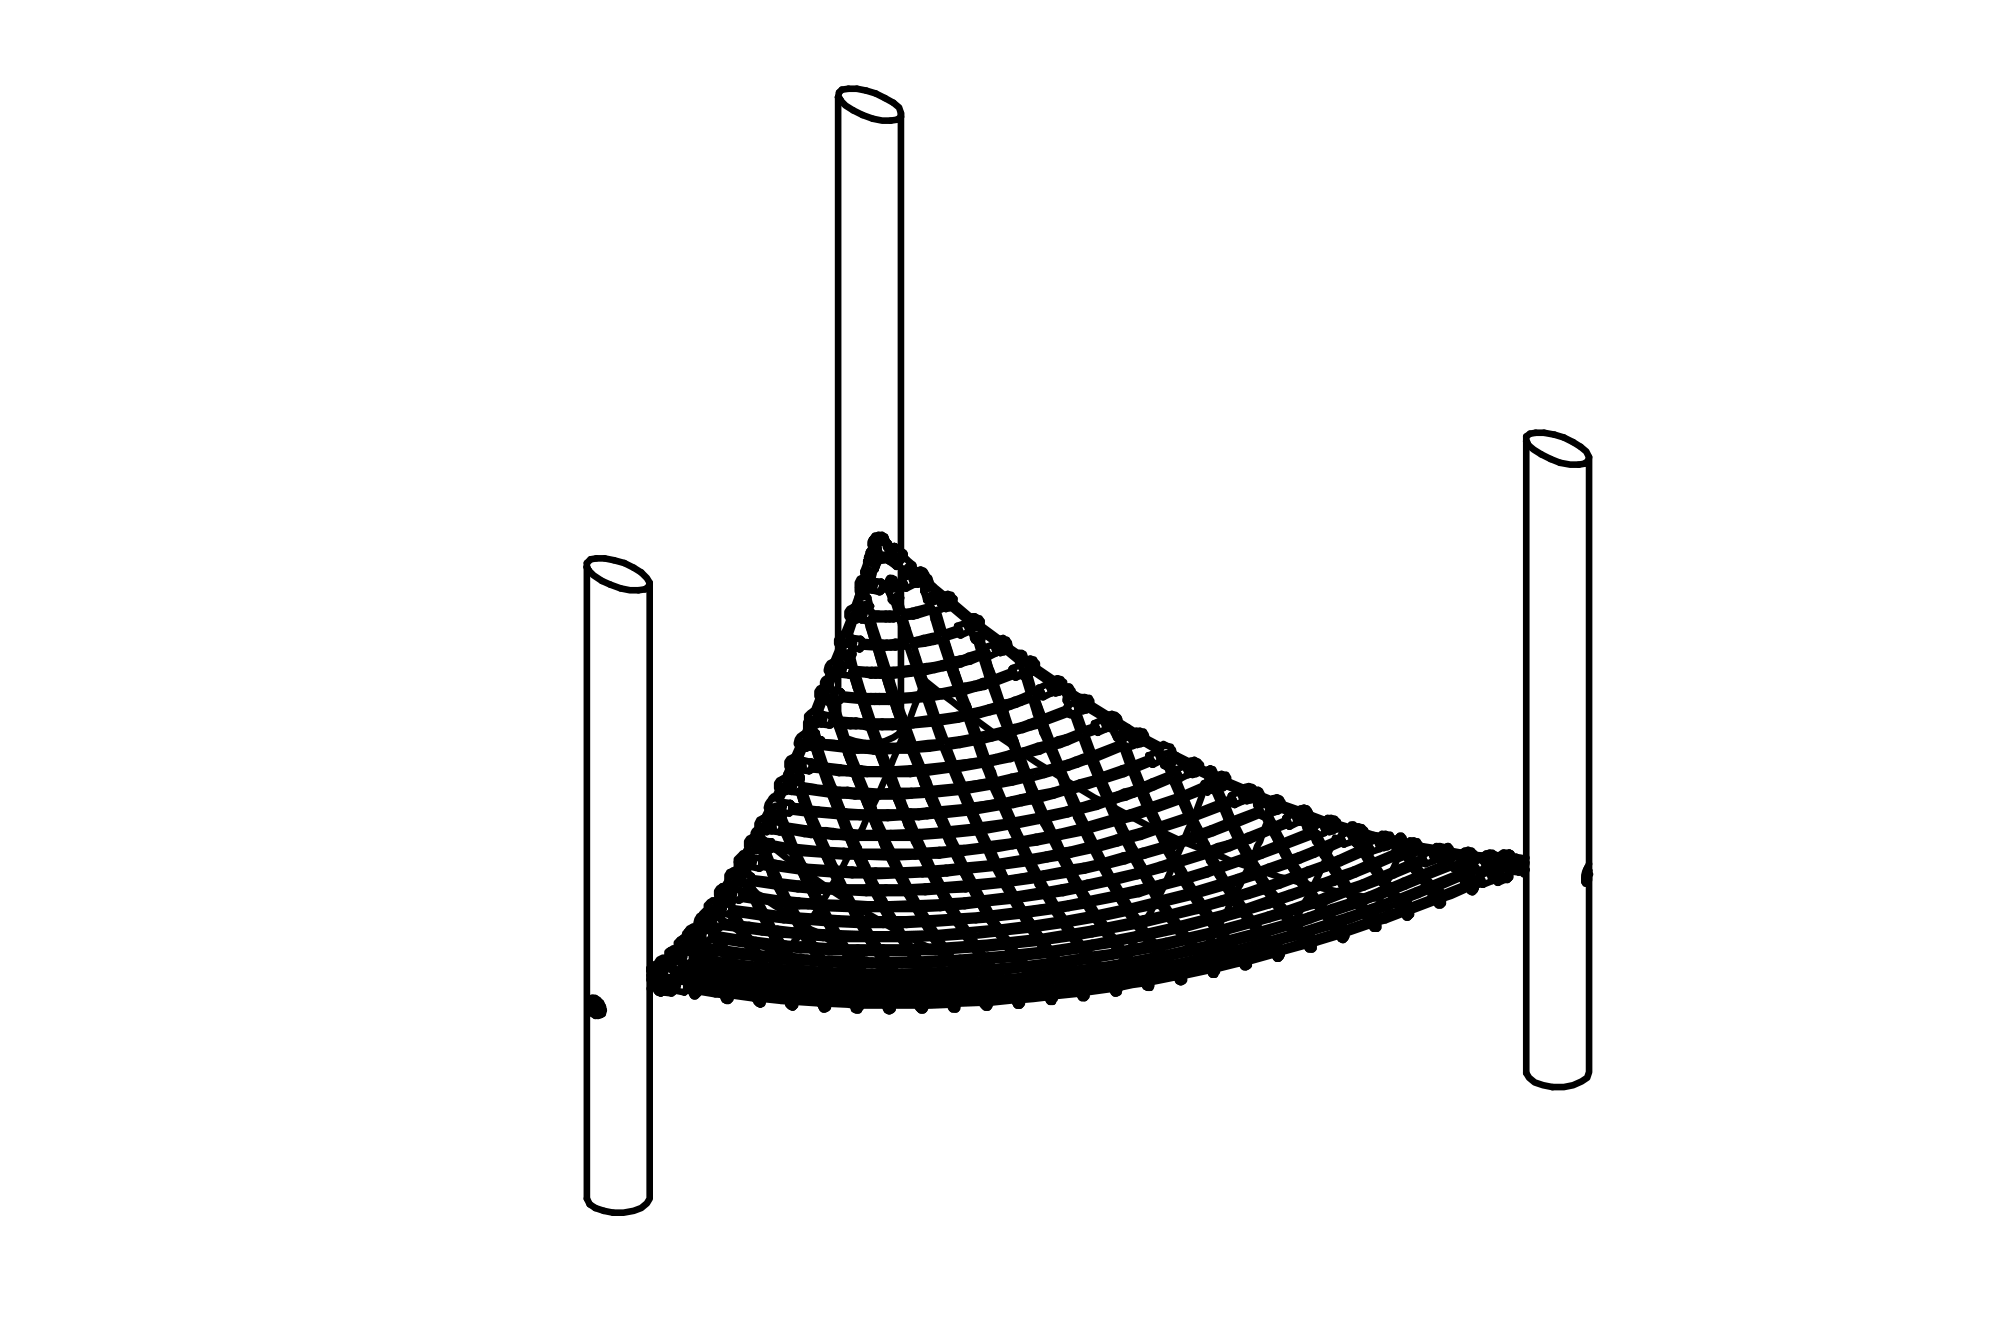 Horizontal triangular net, fine meshed with equipment made of non-impregnated mountain larch